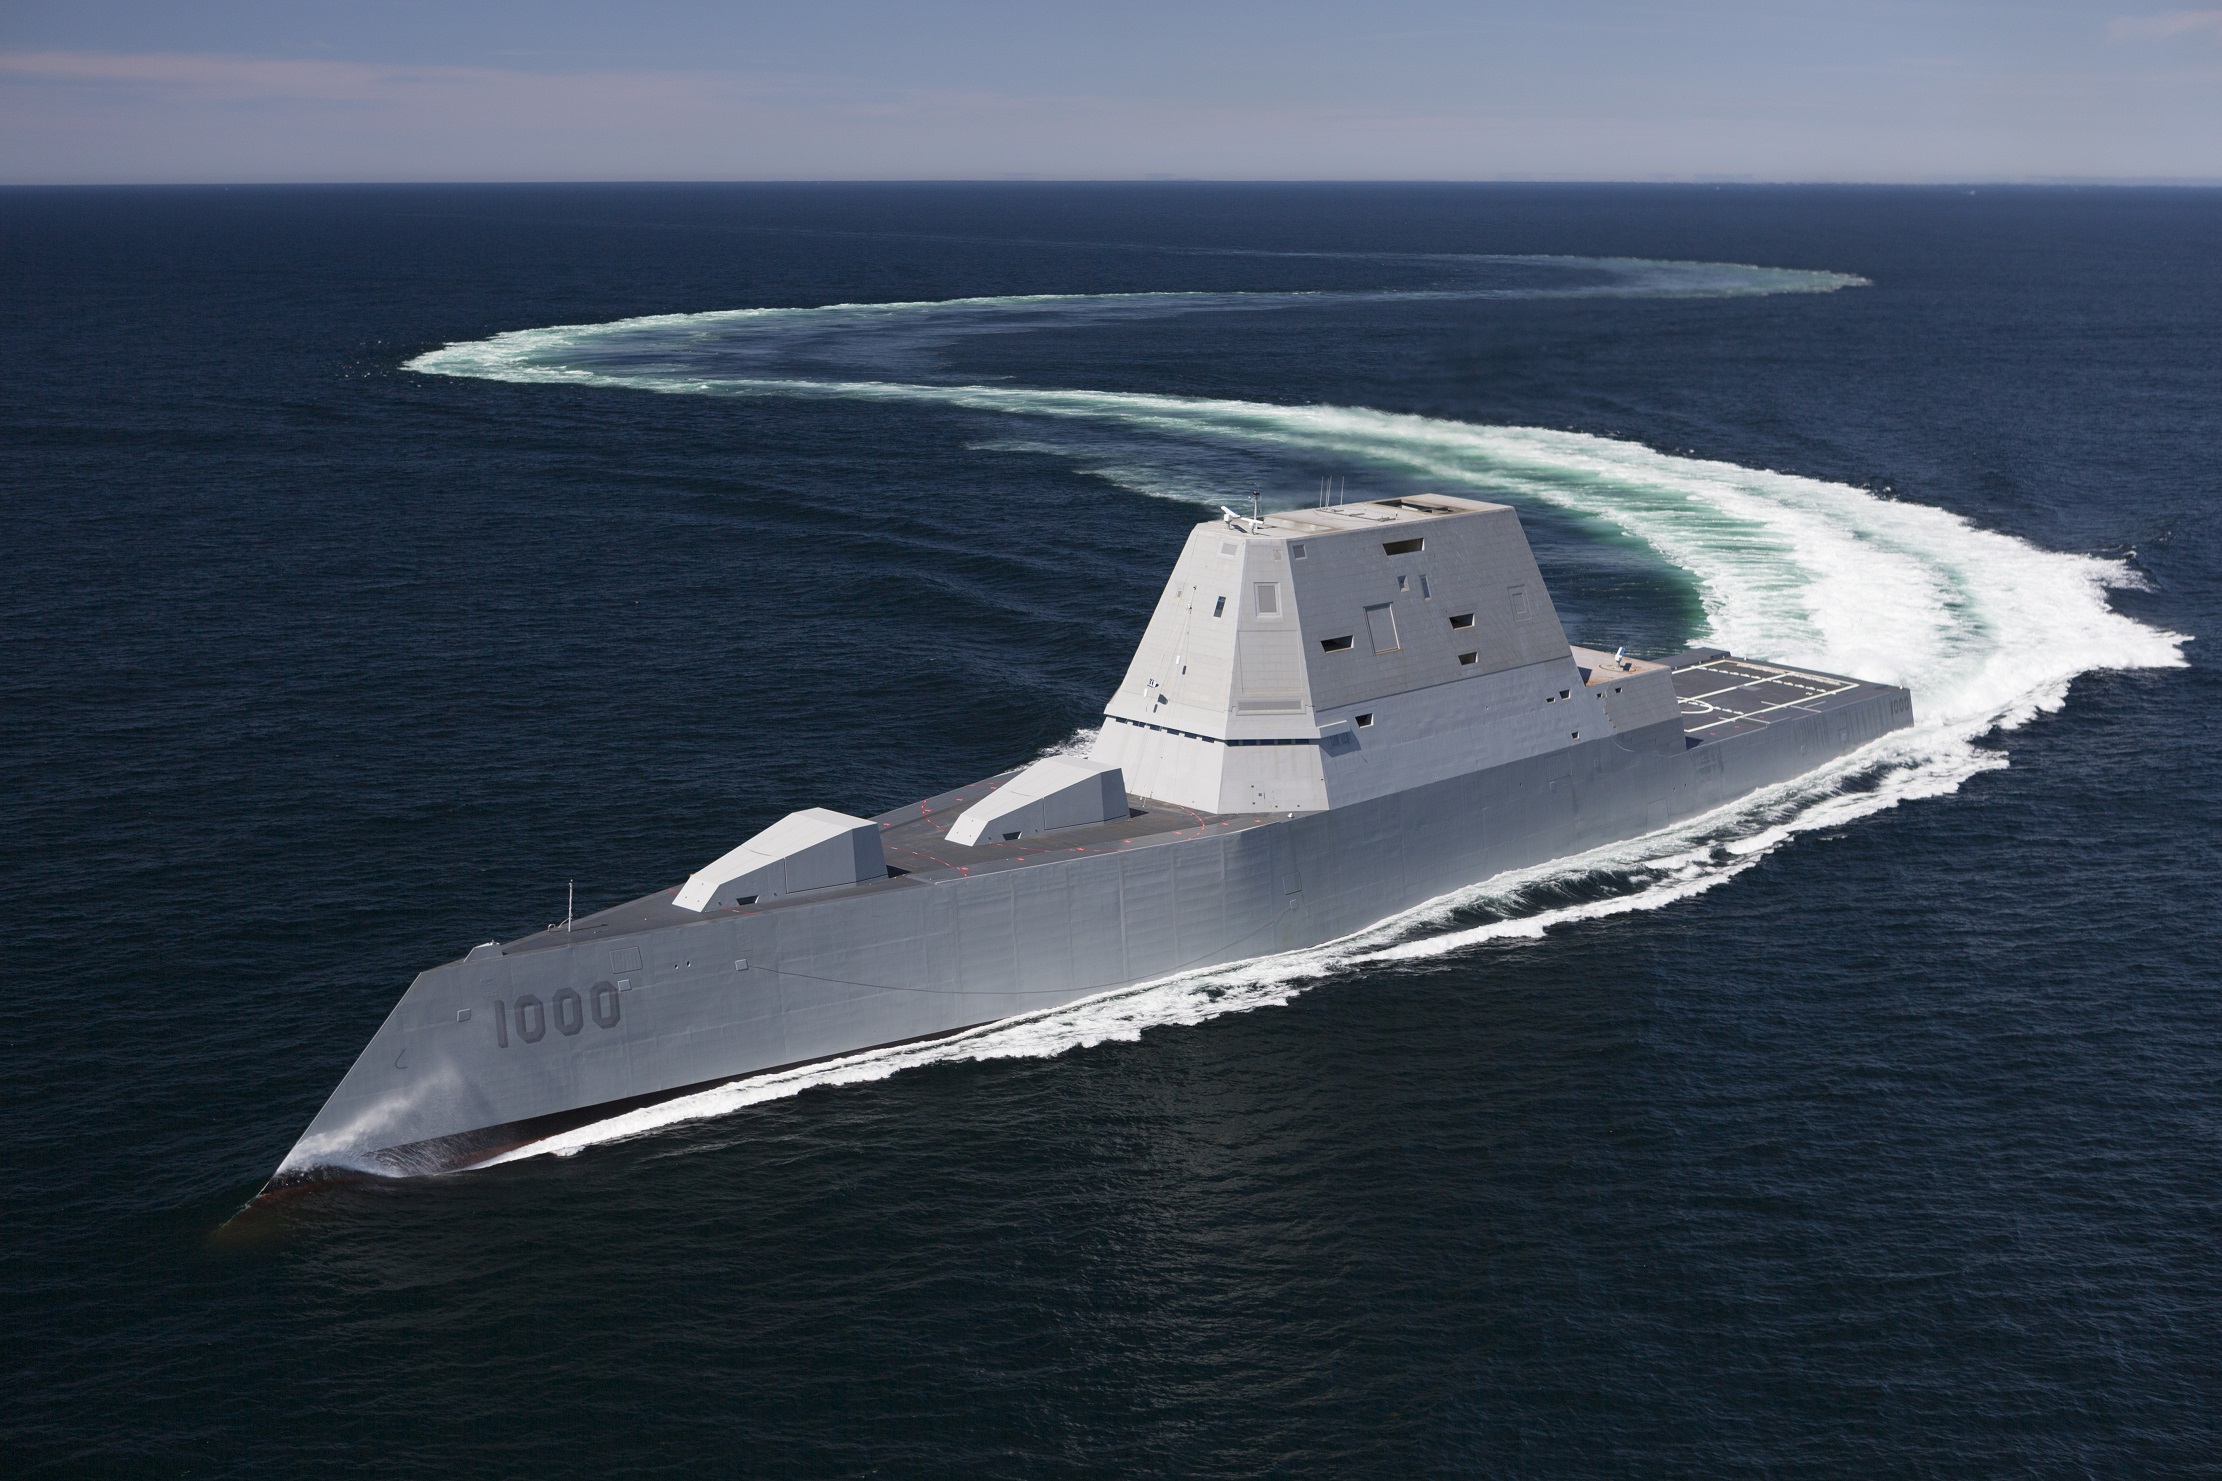 Lockheed Martin and the US Navy will begin testing hypersonic missiles in 2024 on the USS Zumwalt